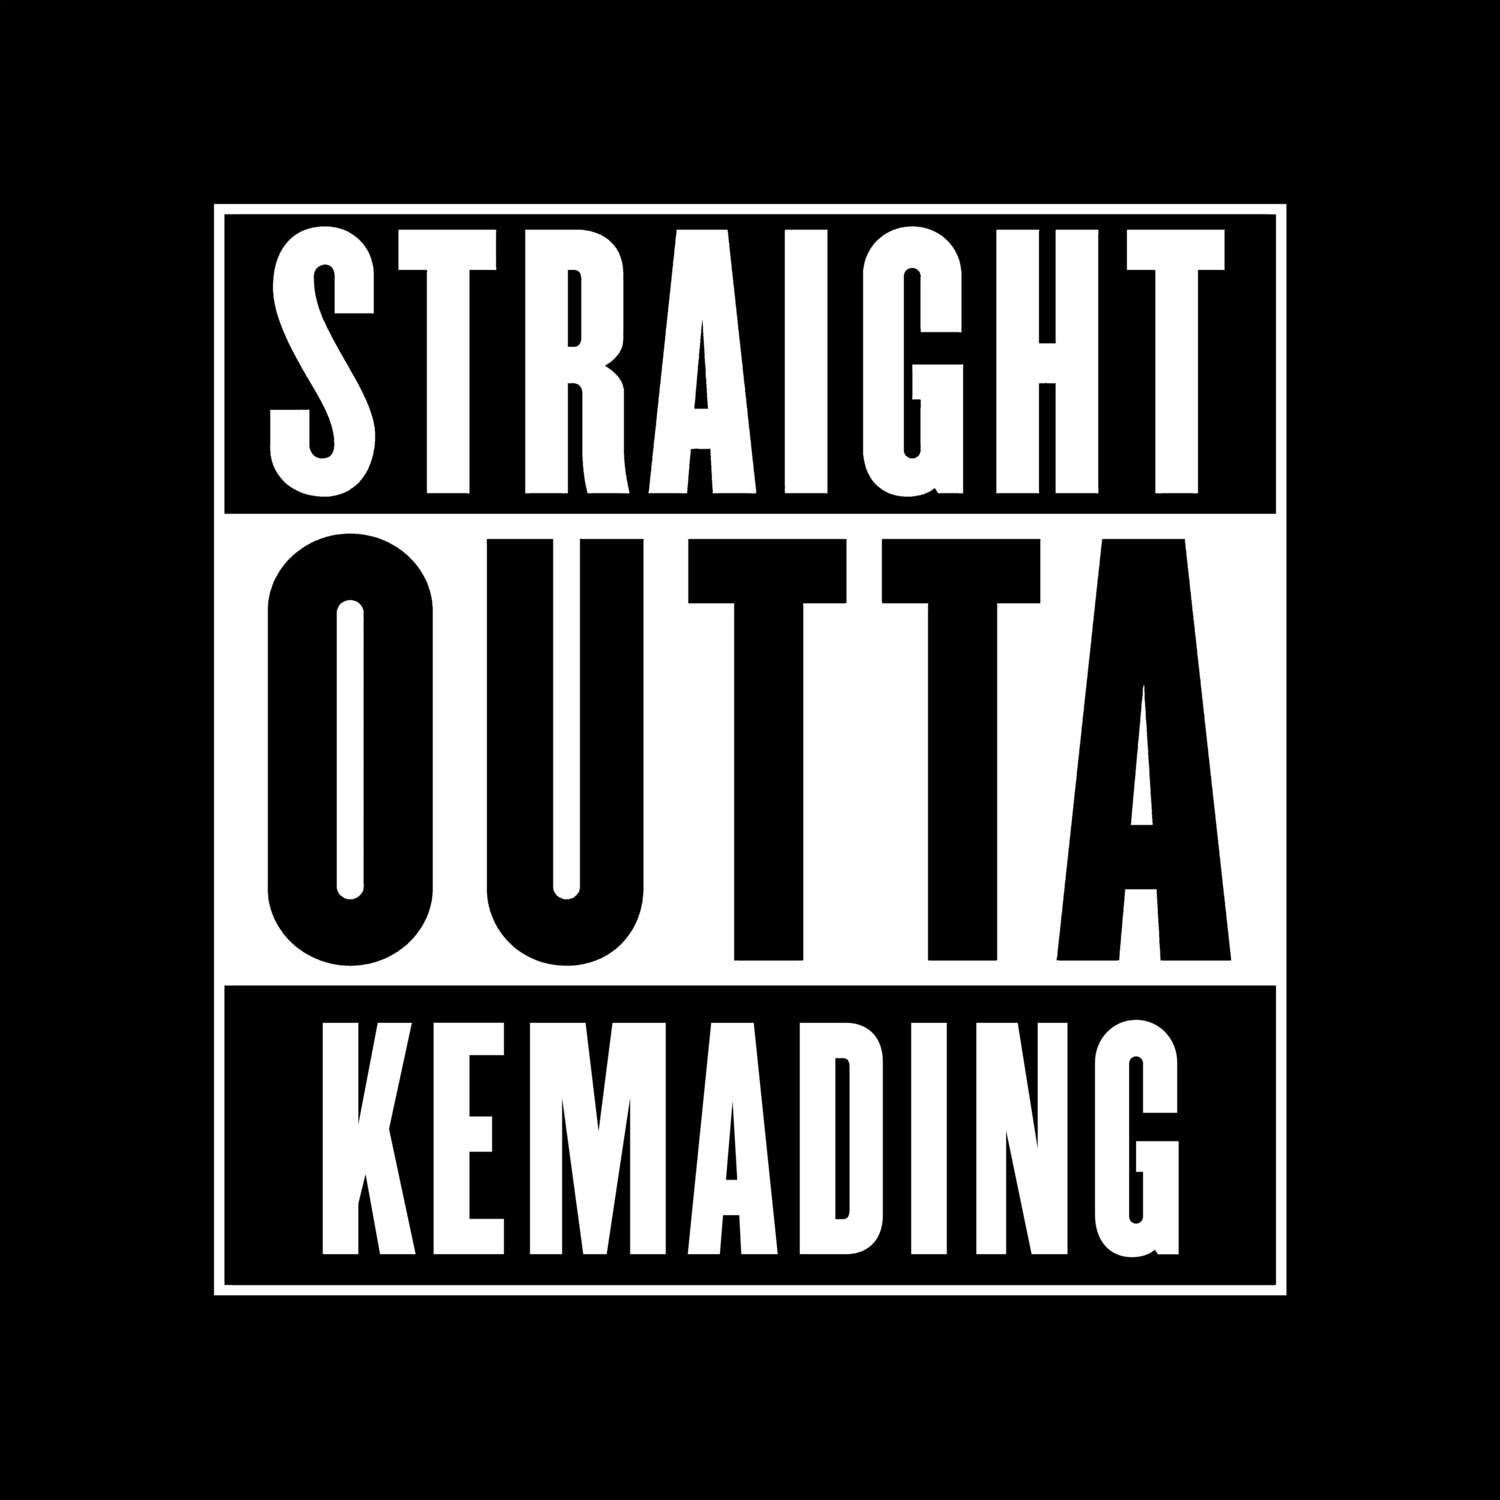 Kemading T-Shirt »Straight Outta«